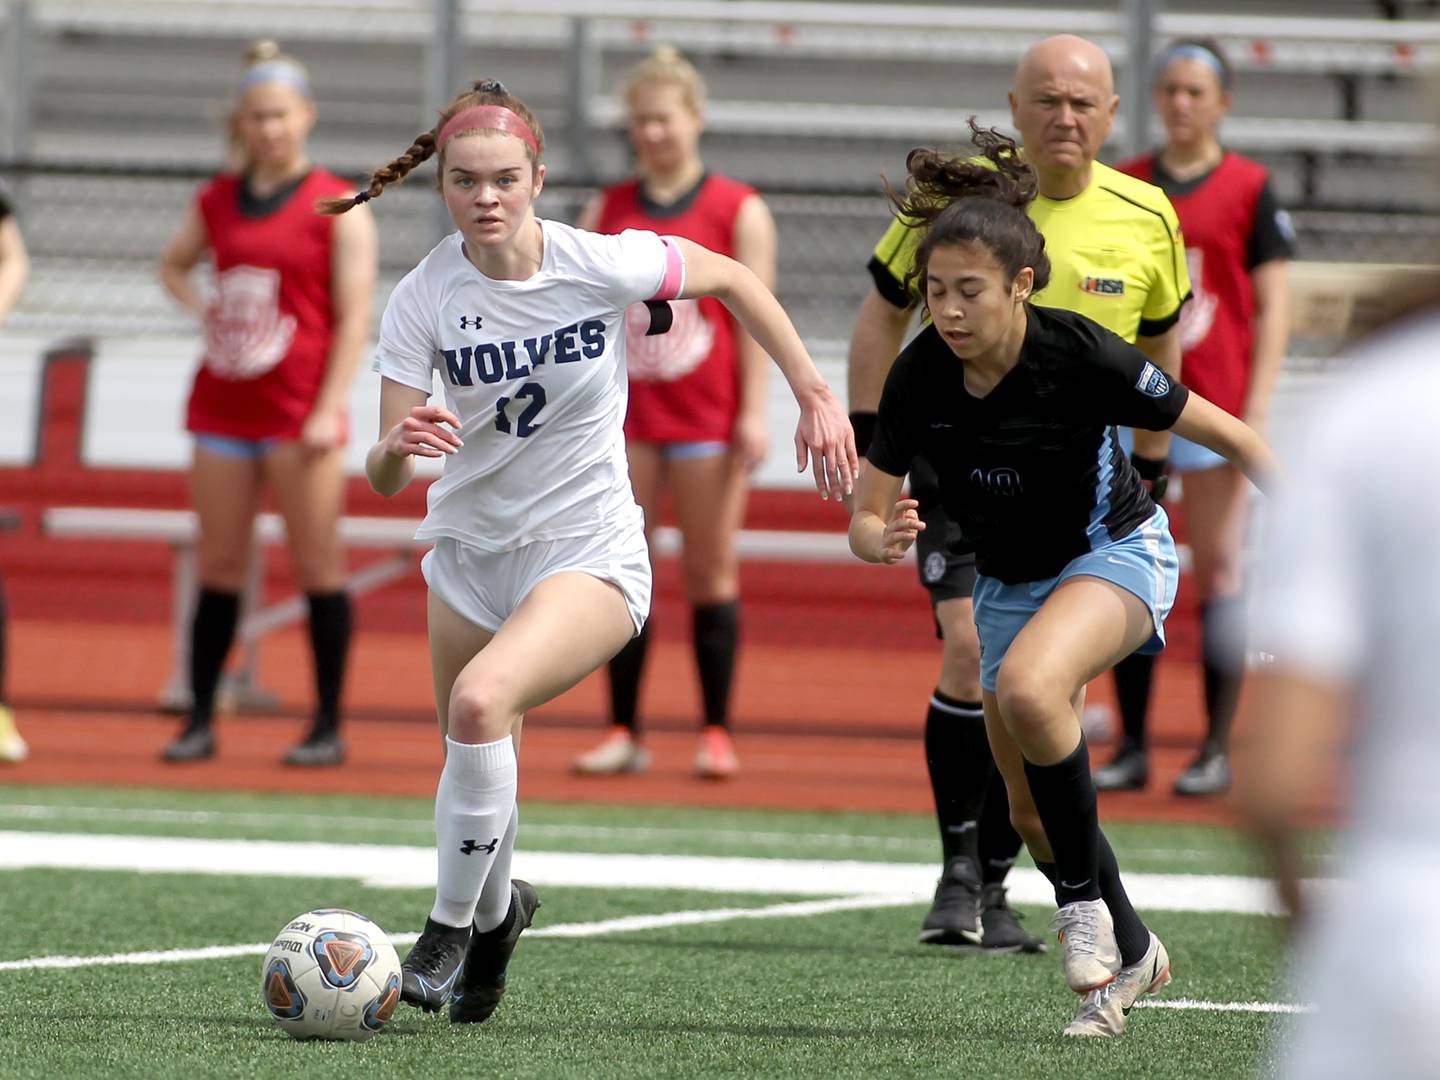 Oswego East’s Chloe Noon (12) and St. Charles North’s Juliana Park chase after the ball during a Naperville Invitational game at Naperville Central on Saturday, April 23, 2022.